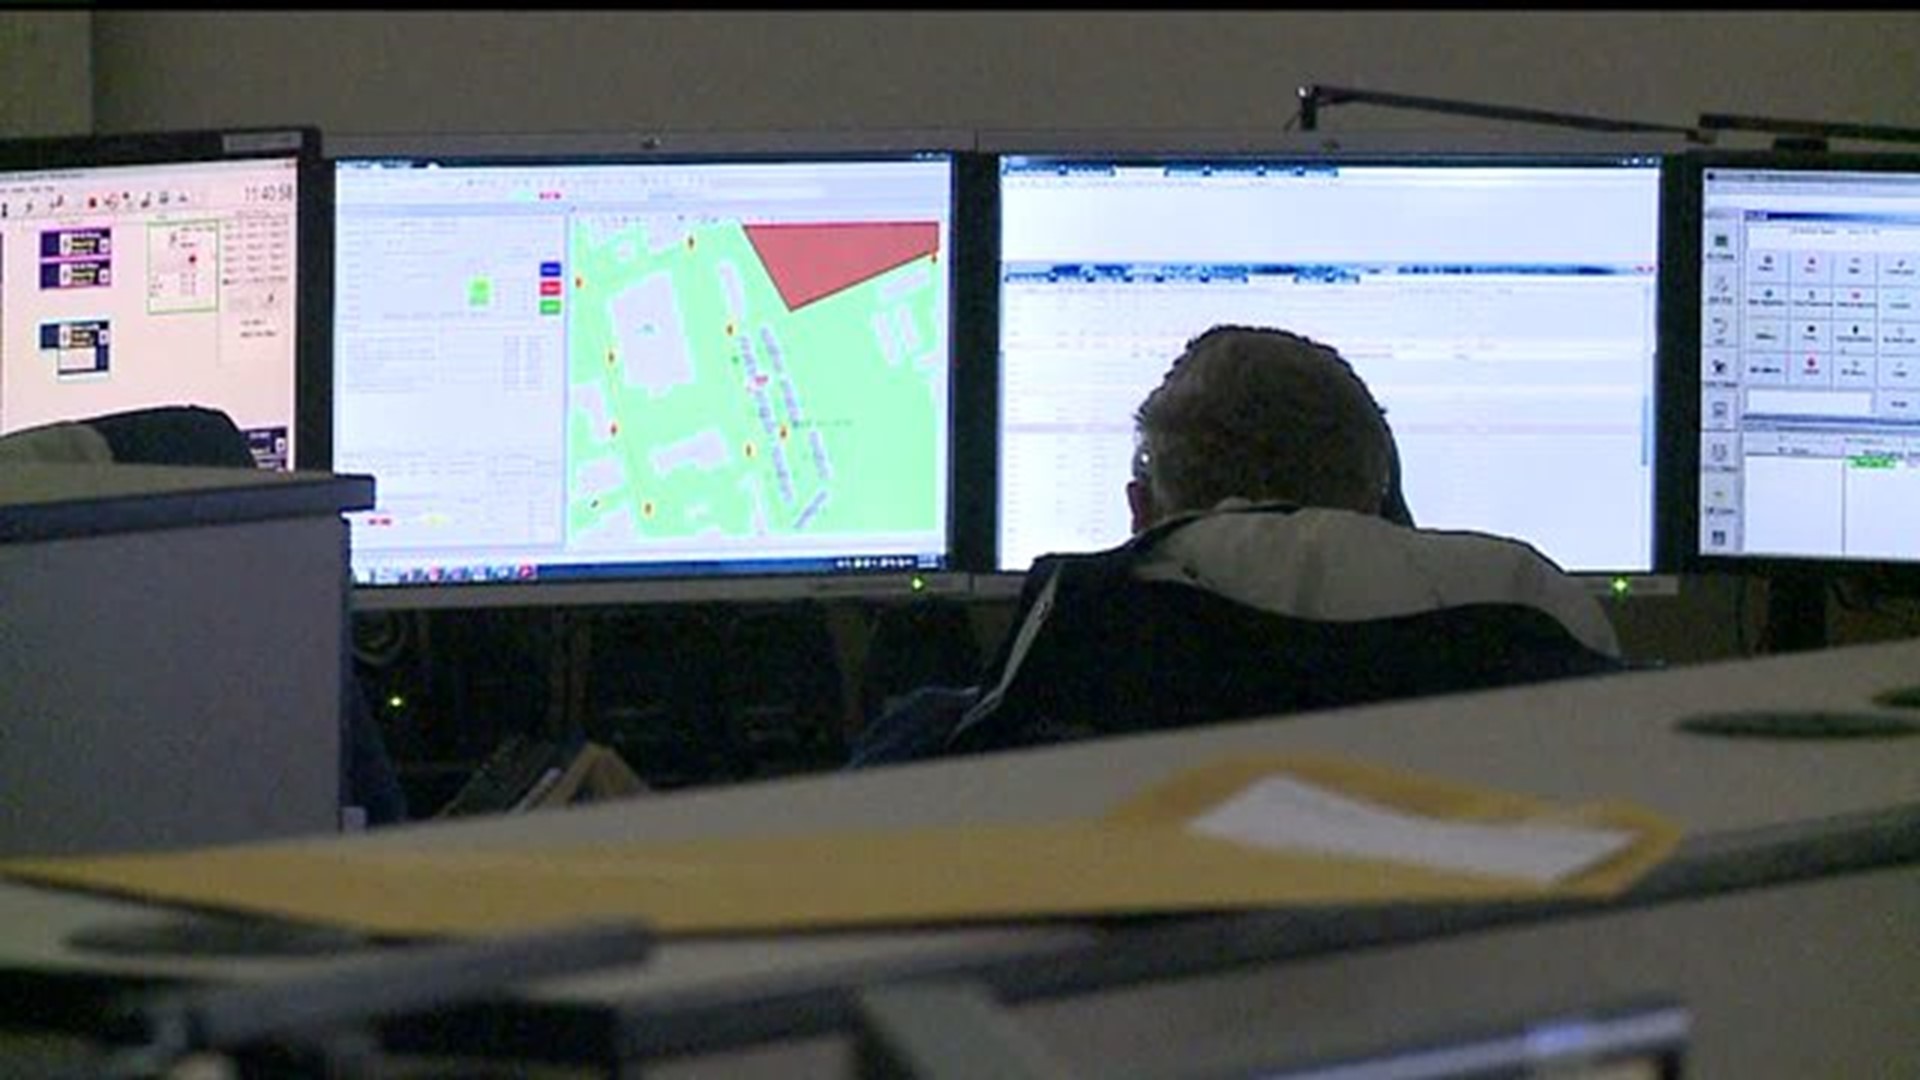 Officials testify at 911 funding hearing in Harrisburg